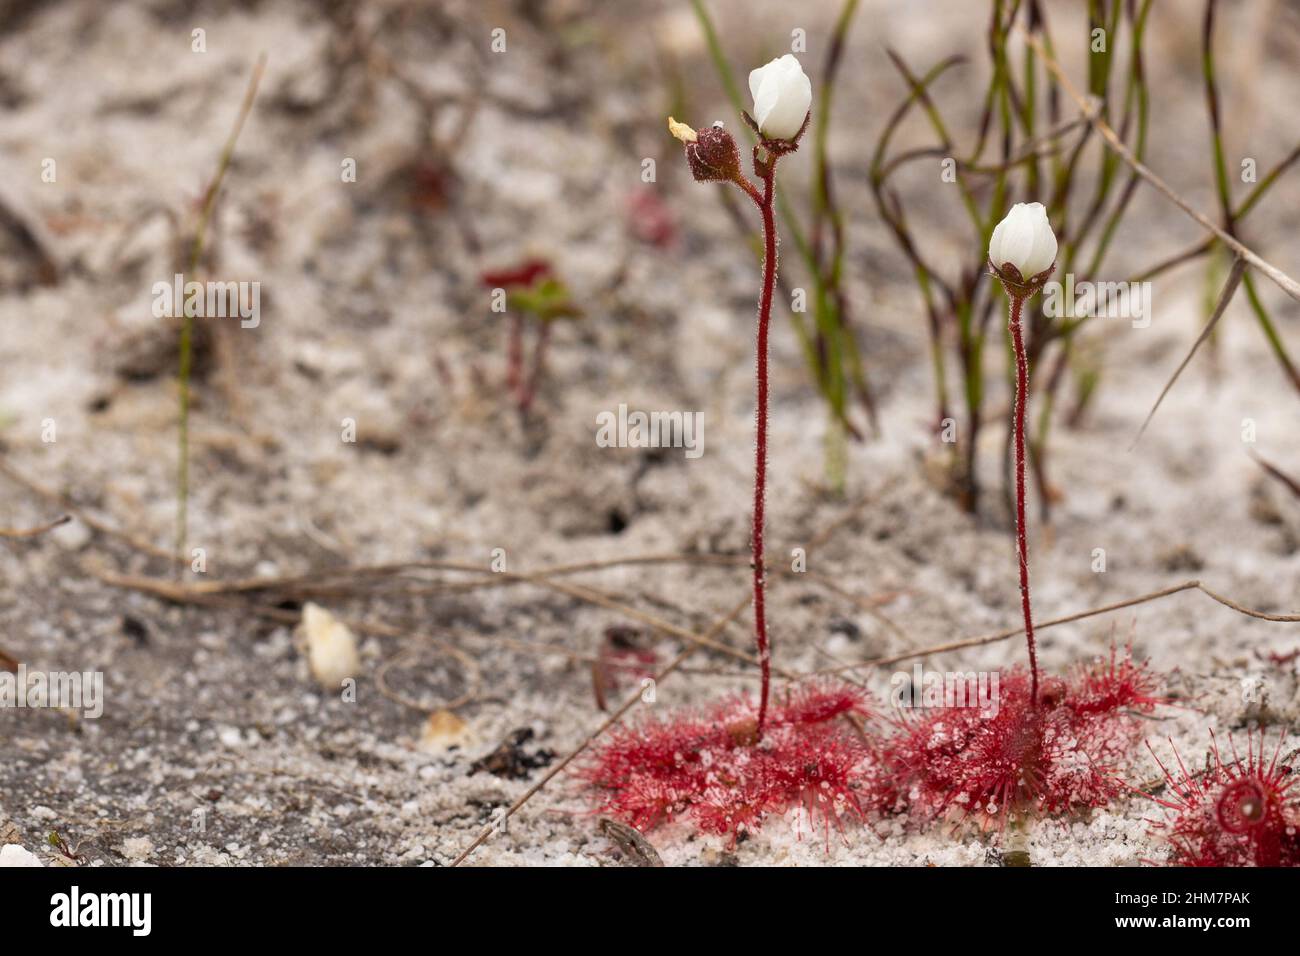 Two flowering plants of Drosera trinervia (a Sundew) seen south of Cape Town in the Western Cape of South Africa Stock Photo